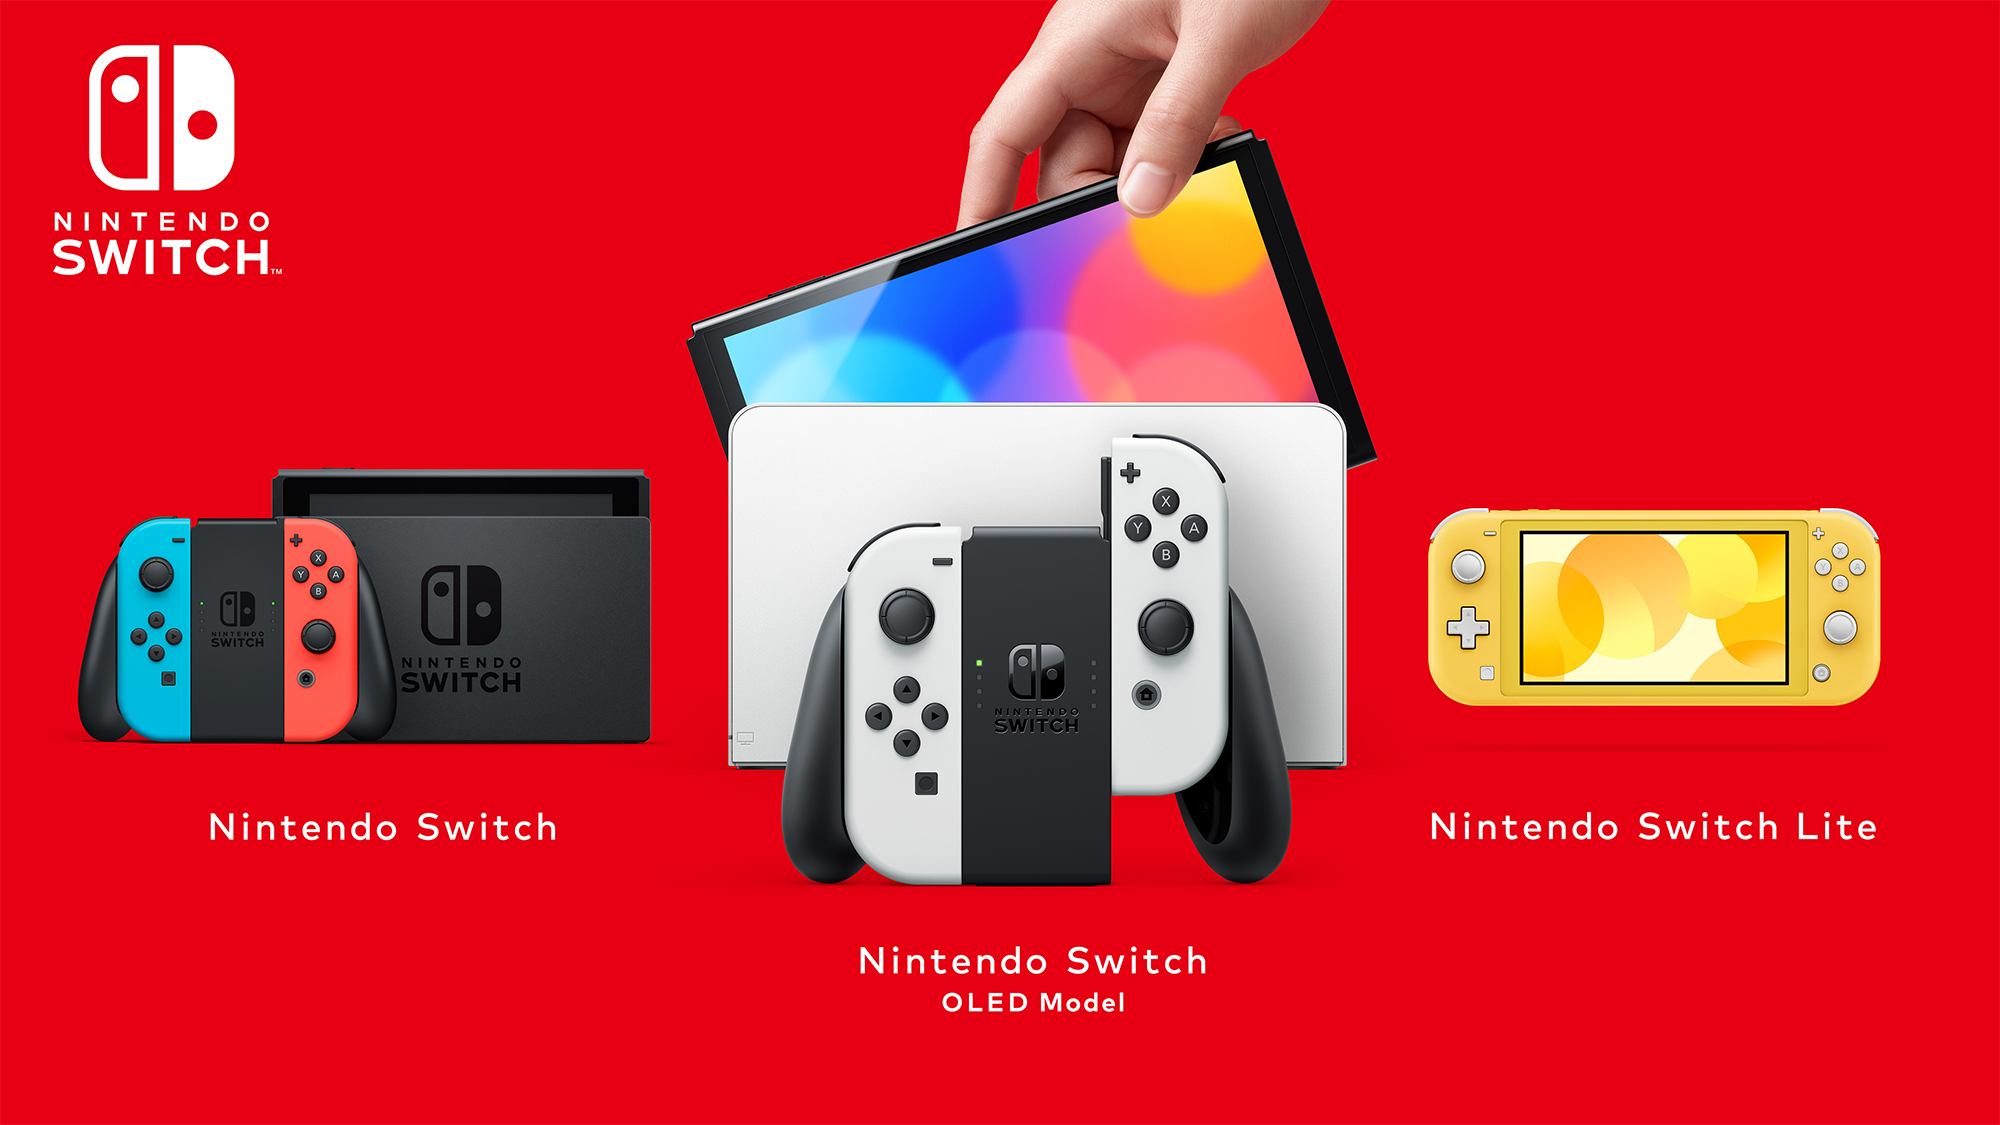 All Nintendo Switch consoles side by side